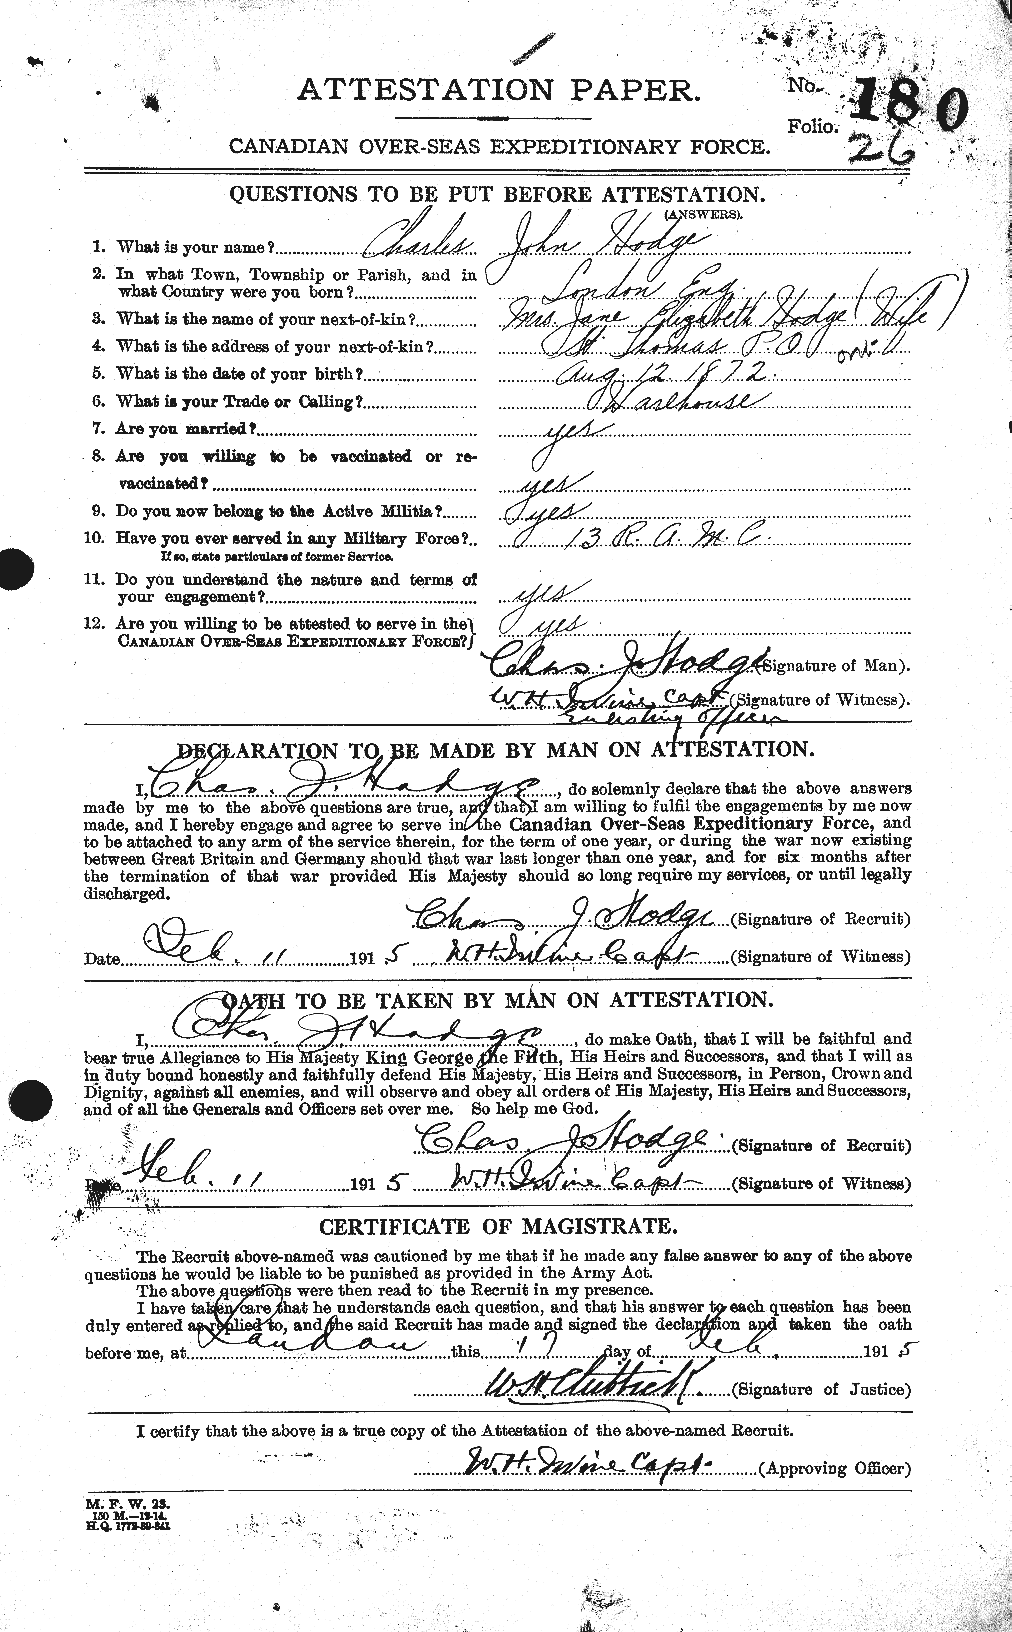 Personnel Records of the First World War - CEF 397833a